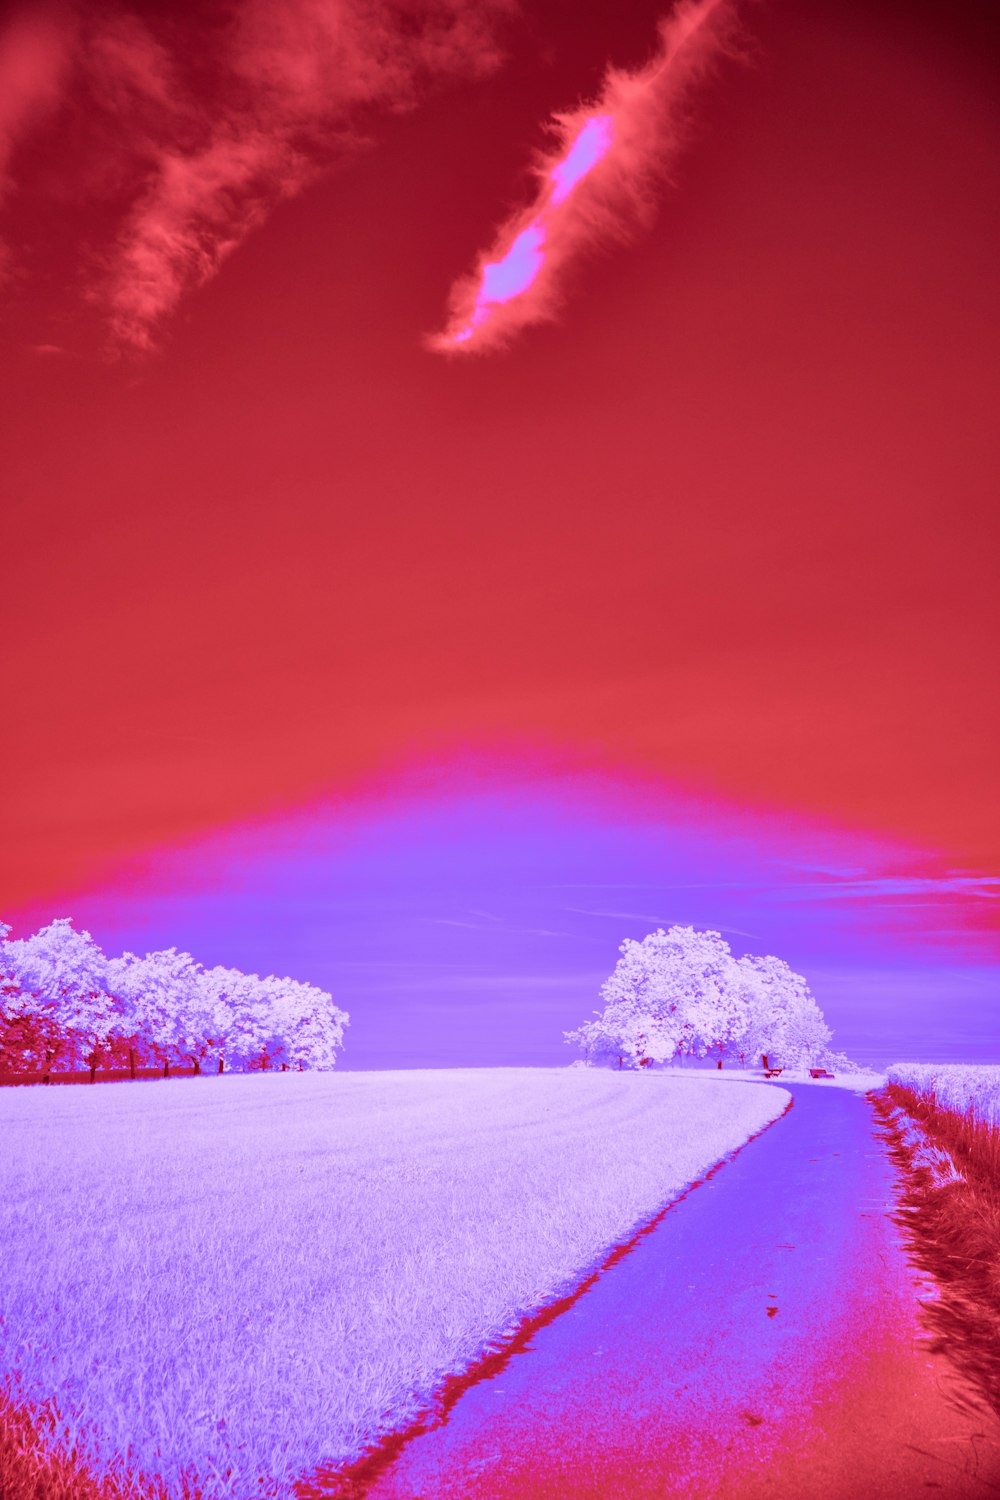 a infrared image of a field with trees